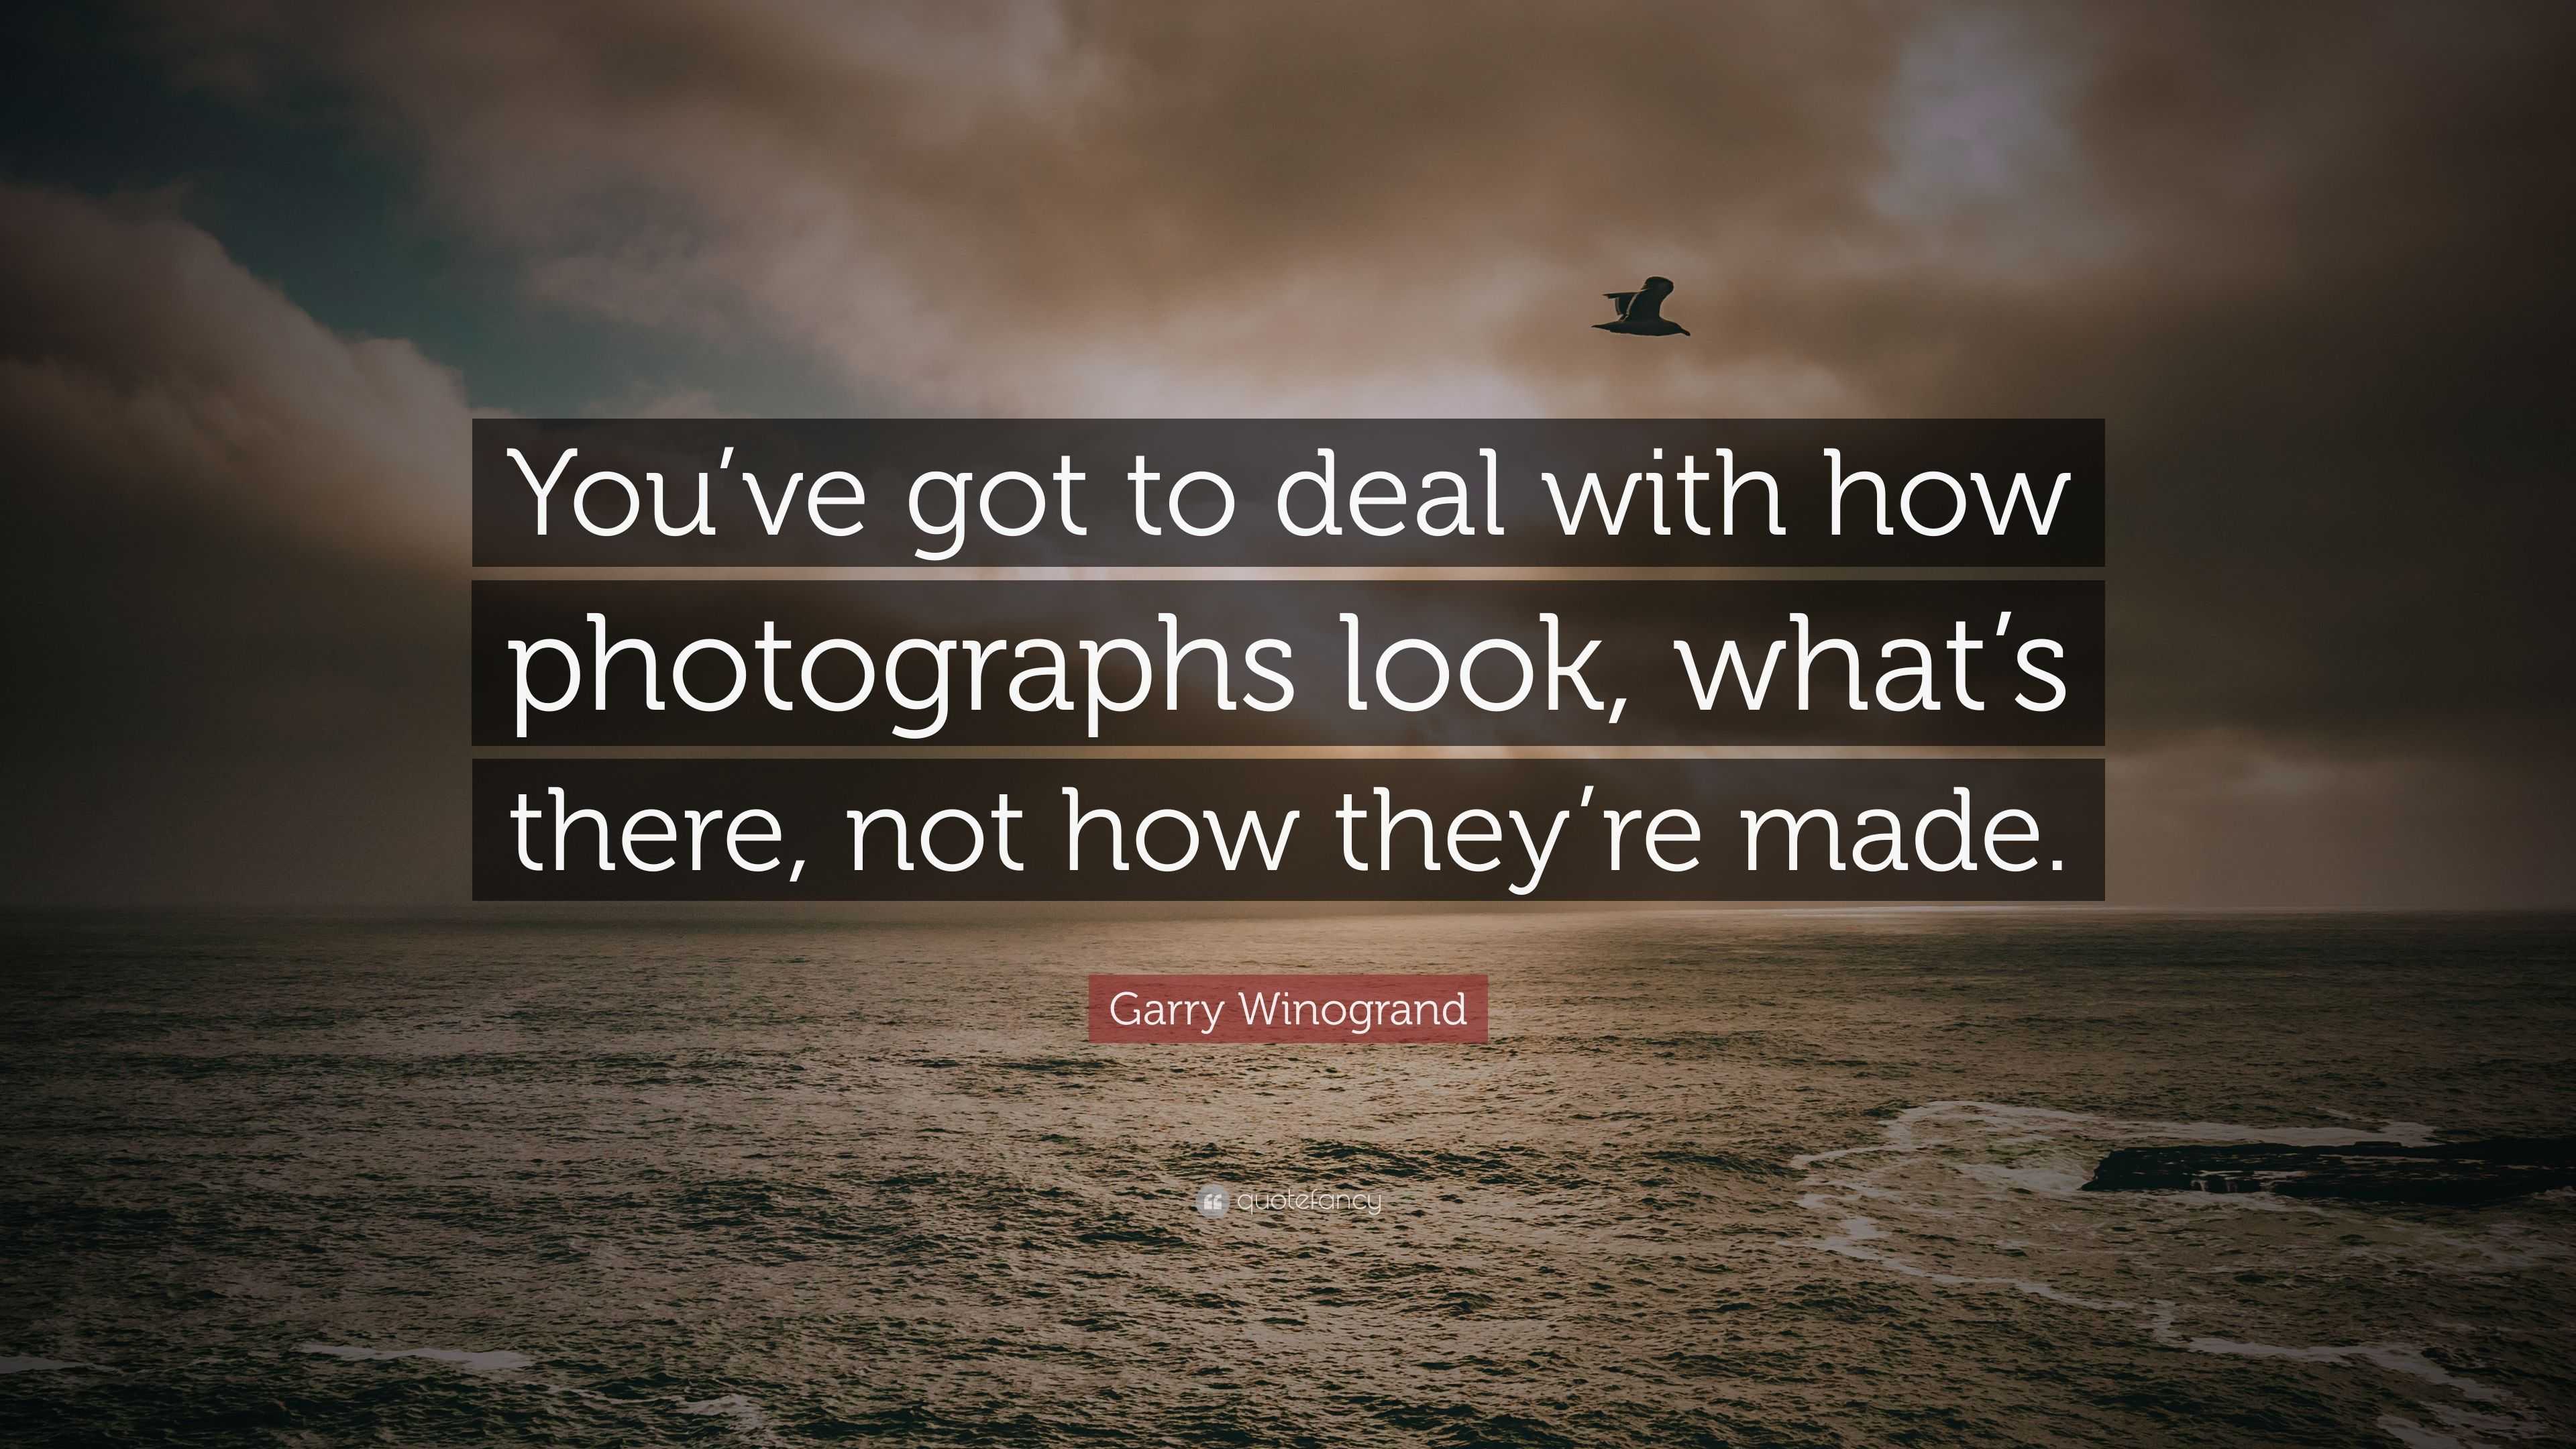 Garry Winogrand Quote: “You’ve got to deal with how photographs look ...